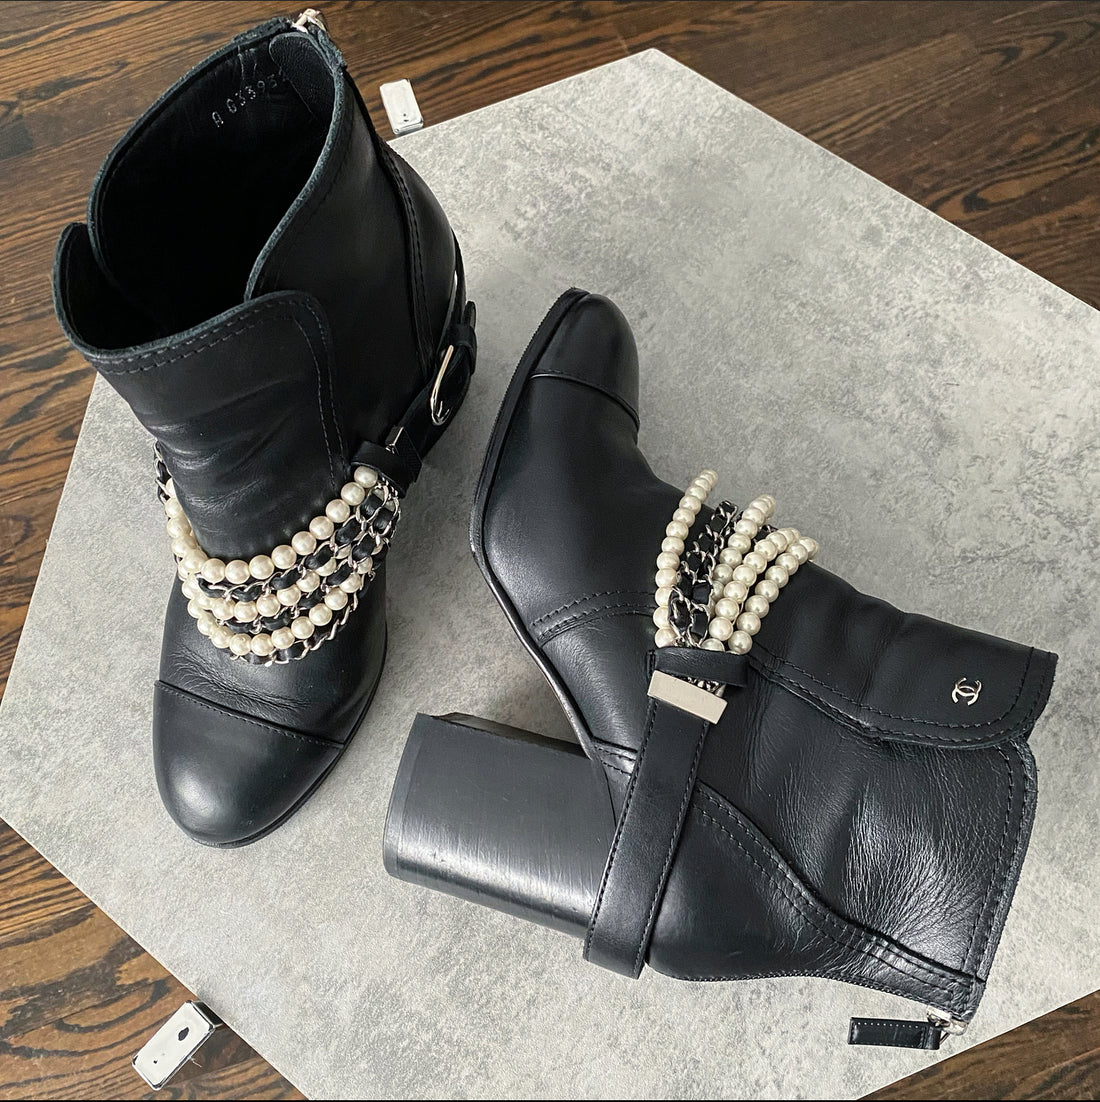 Chanel Black Leather Ankle Boots with Pearl Chain Detail - 41 / 40